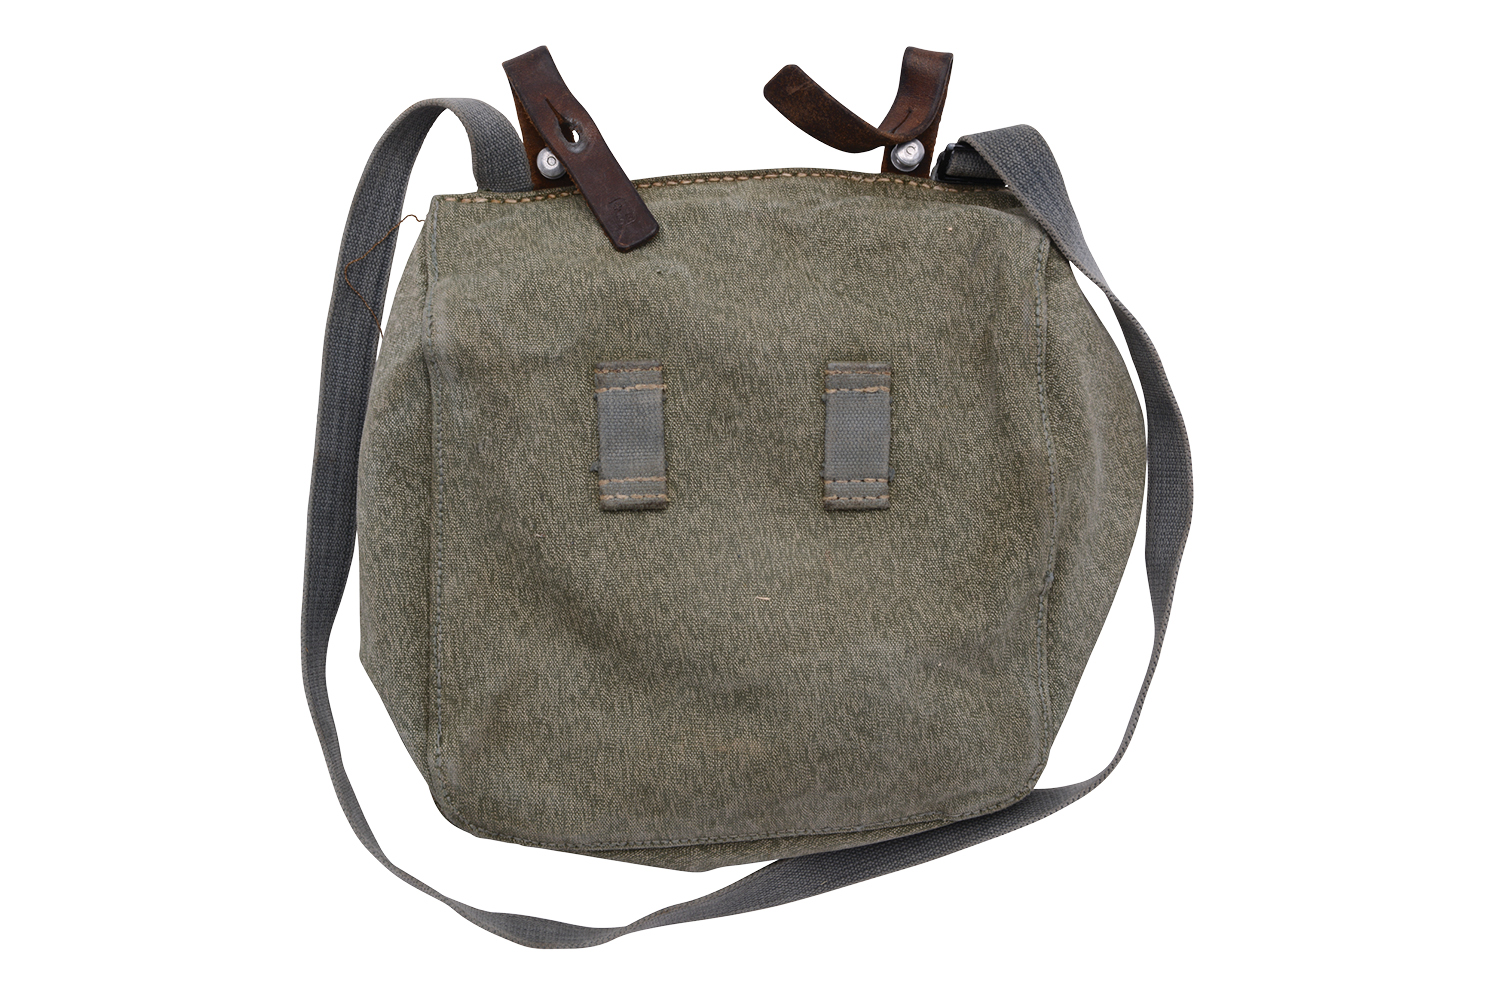 Swiss Army Bread Bag - Edelweiss Arms